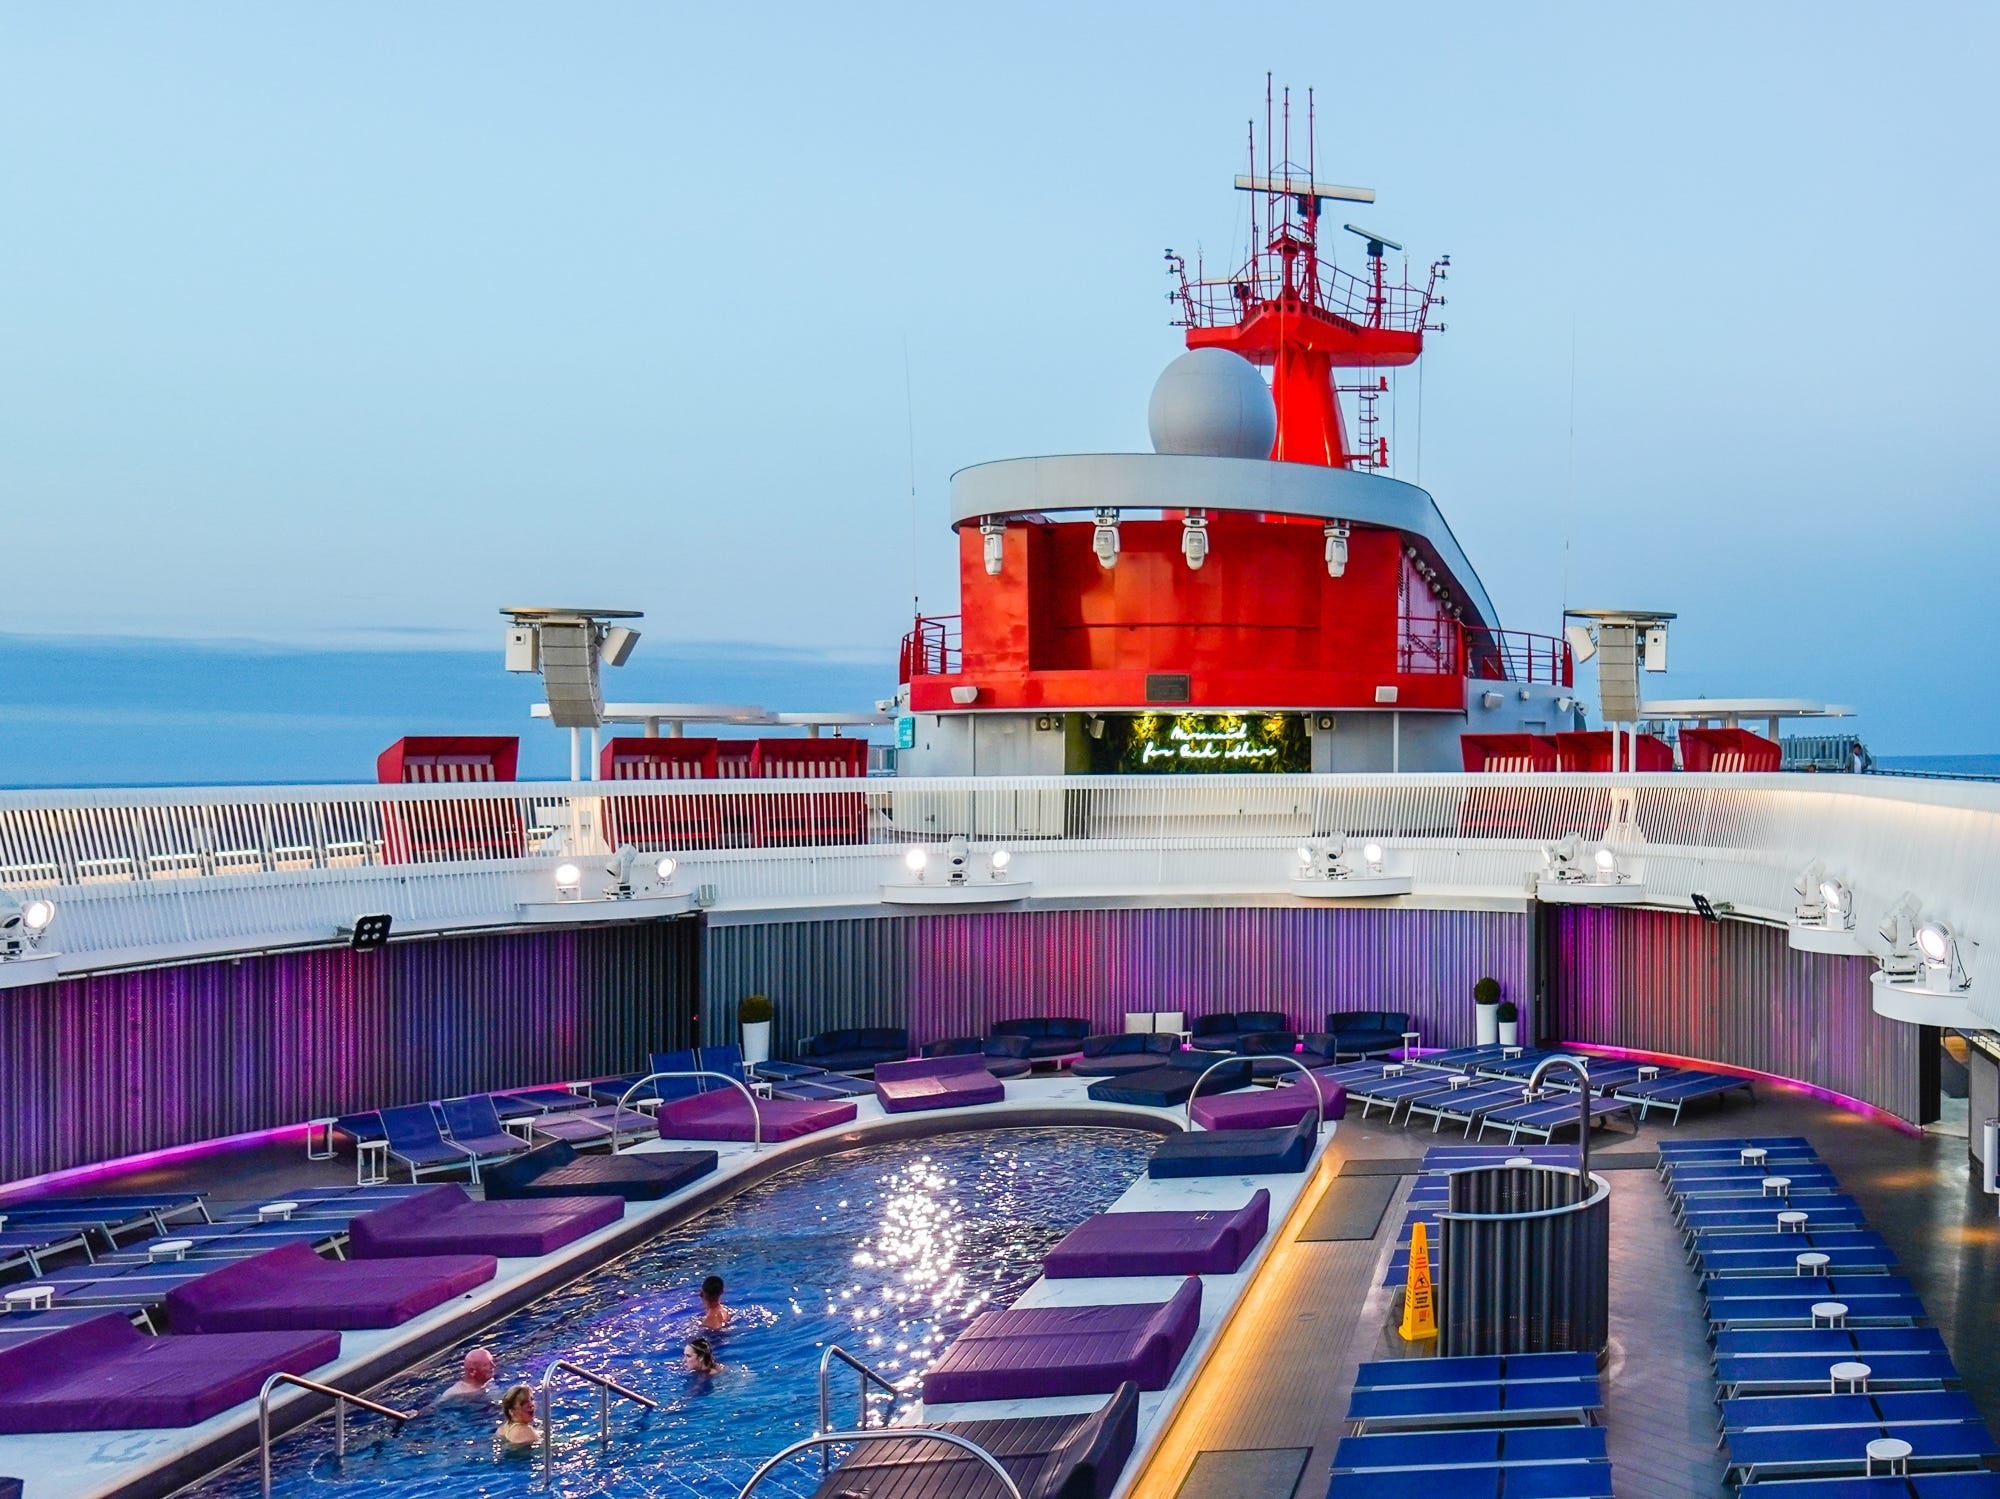 <ul class="summary-list"> <li>I sailed on a luxury, adults-only Virgin Voyages cruise ship called the Valiant Lady.</li> <li>It can hold more than 2,700 guests with unique amenities like a tattoo shop and an adult playground.</li> <li>Here's a tour of the ship's 17 decks full of cabins, restaurants, and communal spaces. </li> </ul><p>In August 2023, I took my first <a href="https://www.businessinsider.com/richard-branson-surprises-delta-flight-with-free-virgin-voyages-cruise-2024-3">cruise with Virgin Voyages</a>, a relatively new <a href="https://www.businessinsider.com/is-virgin-voyages-cruise-worth-it-adult-only-luxury-2024-2">luxury cruise line</a> I've heard about from friends and other travelers for the last couple of years.</p><p>Virgin Voyages launched in 2021 as an <a href="https://www.businessinsider.com/adults-only-cruise-virgin-voyages-better-than-royal-caribbean-2024-1">adults-only cruise line</a>, <a href="https://www.virginvoyages.com/awards" rel="noopener">according to its website</a>. Since then, it's won several awards, including five from Cruise Critic for its cabins, dining, service, and ships in 2023.</p><p>Virgin Voyages has four "lady" ships: <a href="https://www.businessinsider.com/photos-tour-virgin-voyages-first-cruise-ship-2021-9">Scarlet Lady</a>, Valiant Lady, Resilient Lady, and Brilliant Lady. A representative from Virgin Voyages told Business Insider that the ships are pretty much identical, aside from some differences in artwork and entertainment. </p><p>I cruised on Valiant Lady, which began sailing in March 2022. Like the other ships, it can hold more than 2,700 guests.</p><div class="read-original">Read the original article on <a href="https://www.businessinsider.com/virgin-voyages-valiant-lady-cruise-ship-tour-photos-2023-9">Business Insider</a></div>